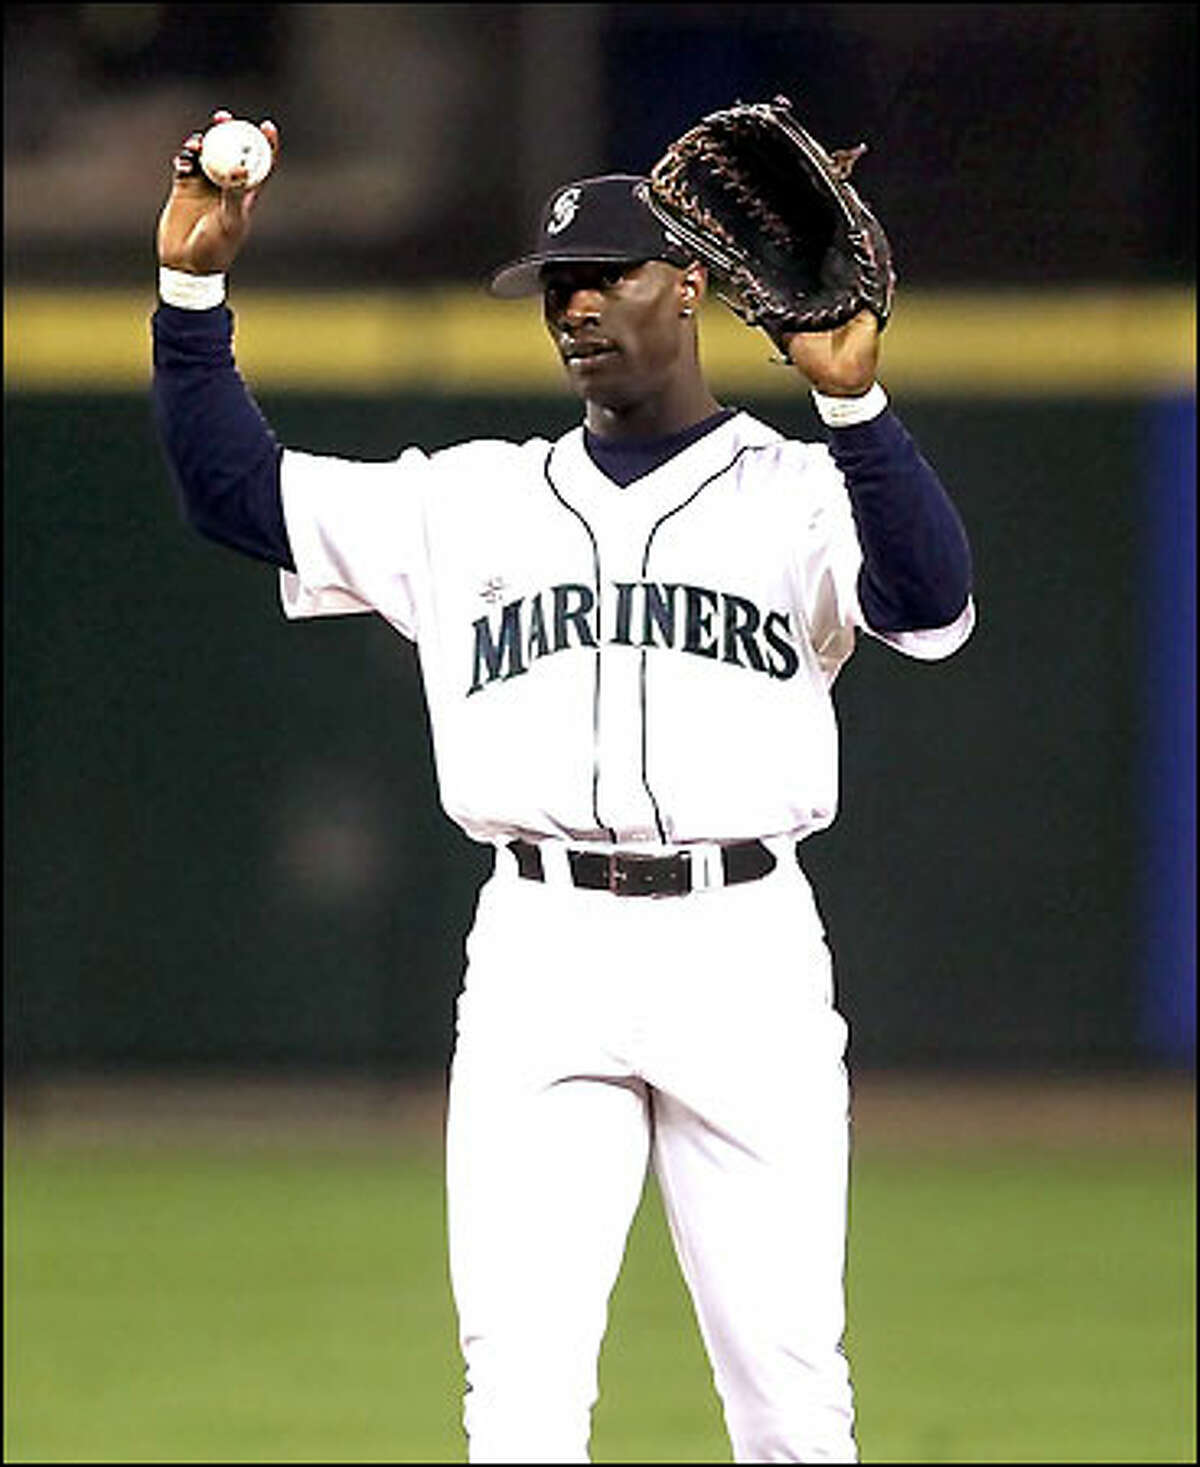 Mike Cameron reacts to the call after a play at the wall in the second inning of play at Safeco Field.